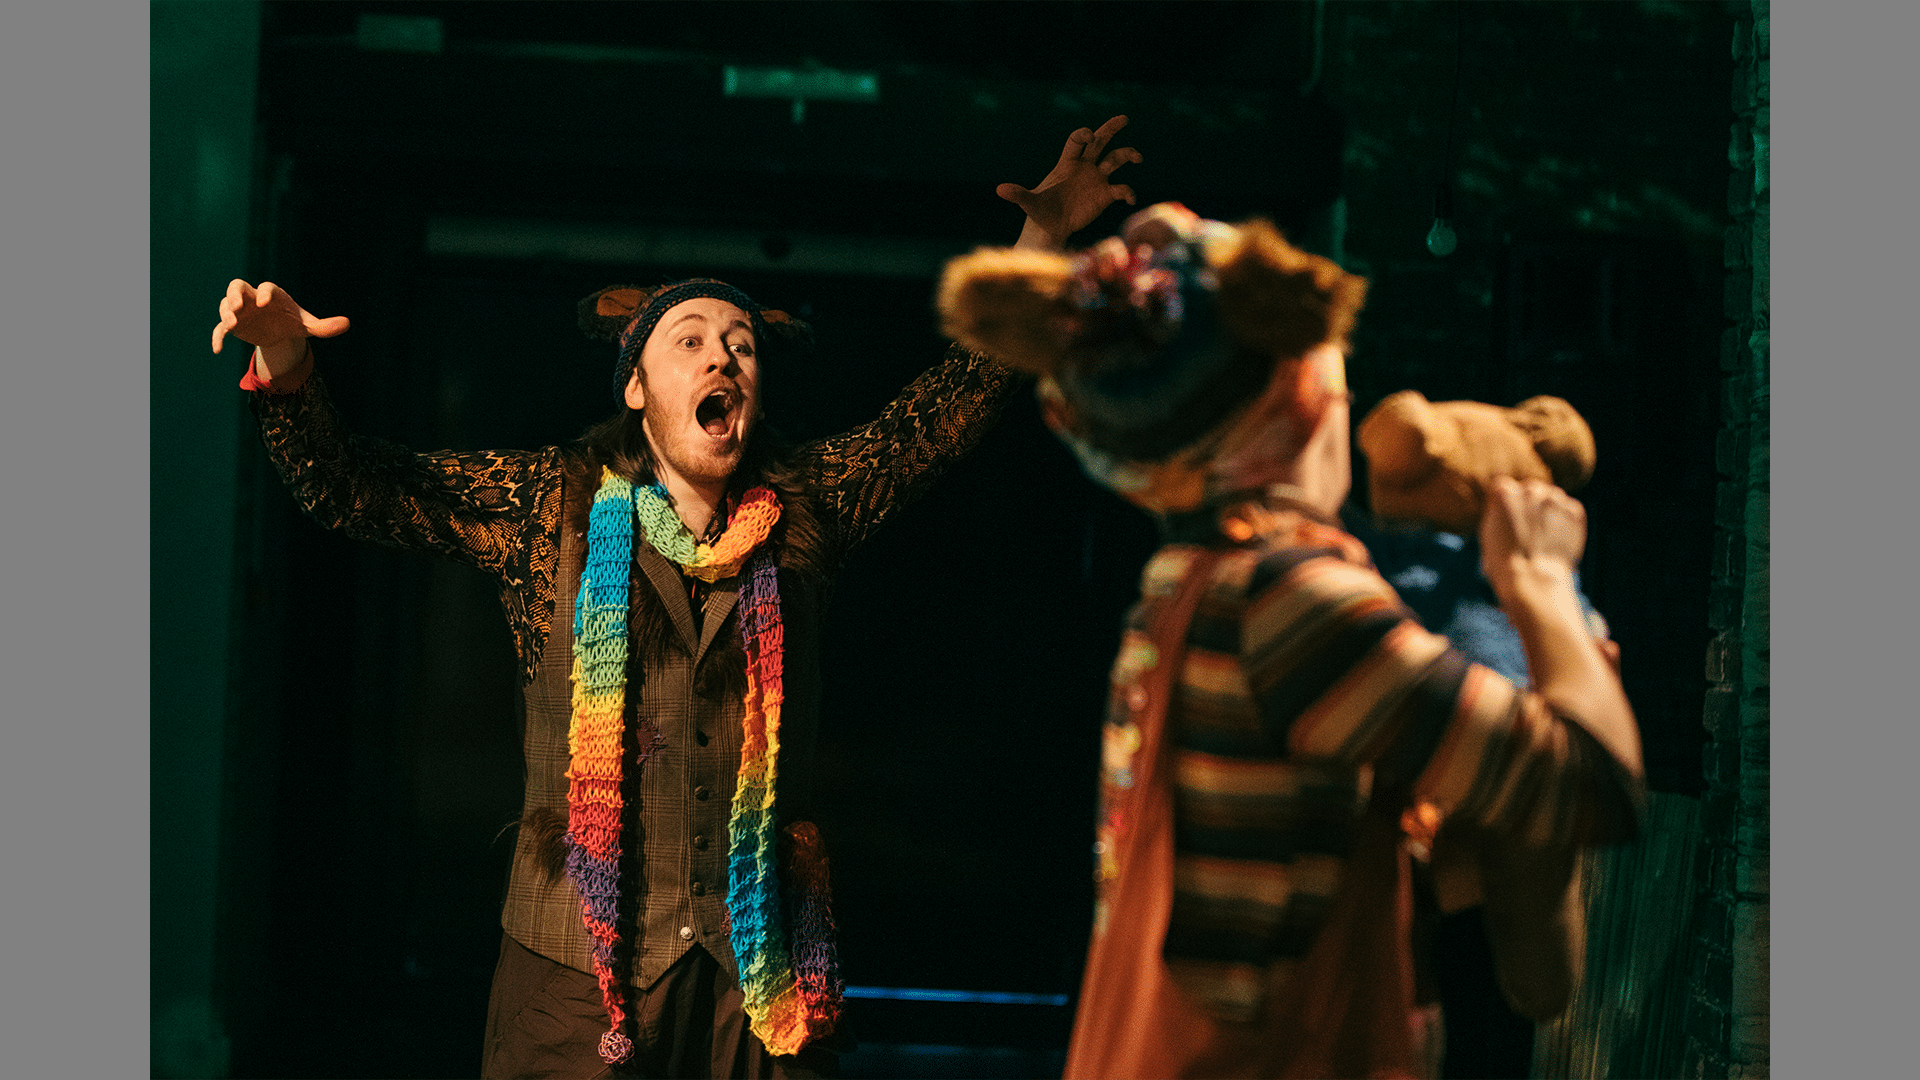 A performer stands on stage holding a bear puppet, their back is turned away from the camera. They are looking at another performer who wears a rainbow coloured scarf, it looks like he is jumping out on them.